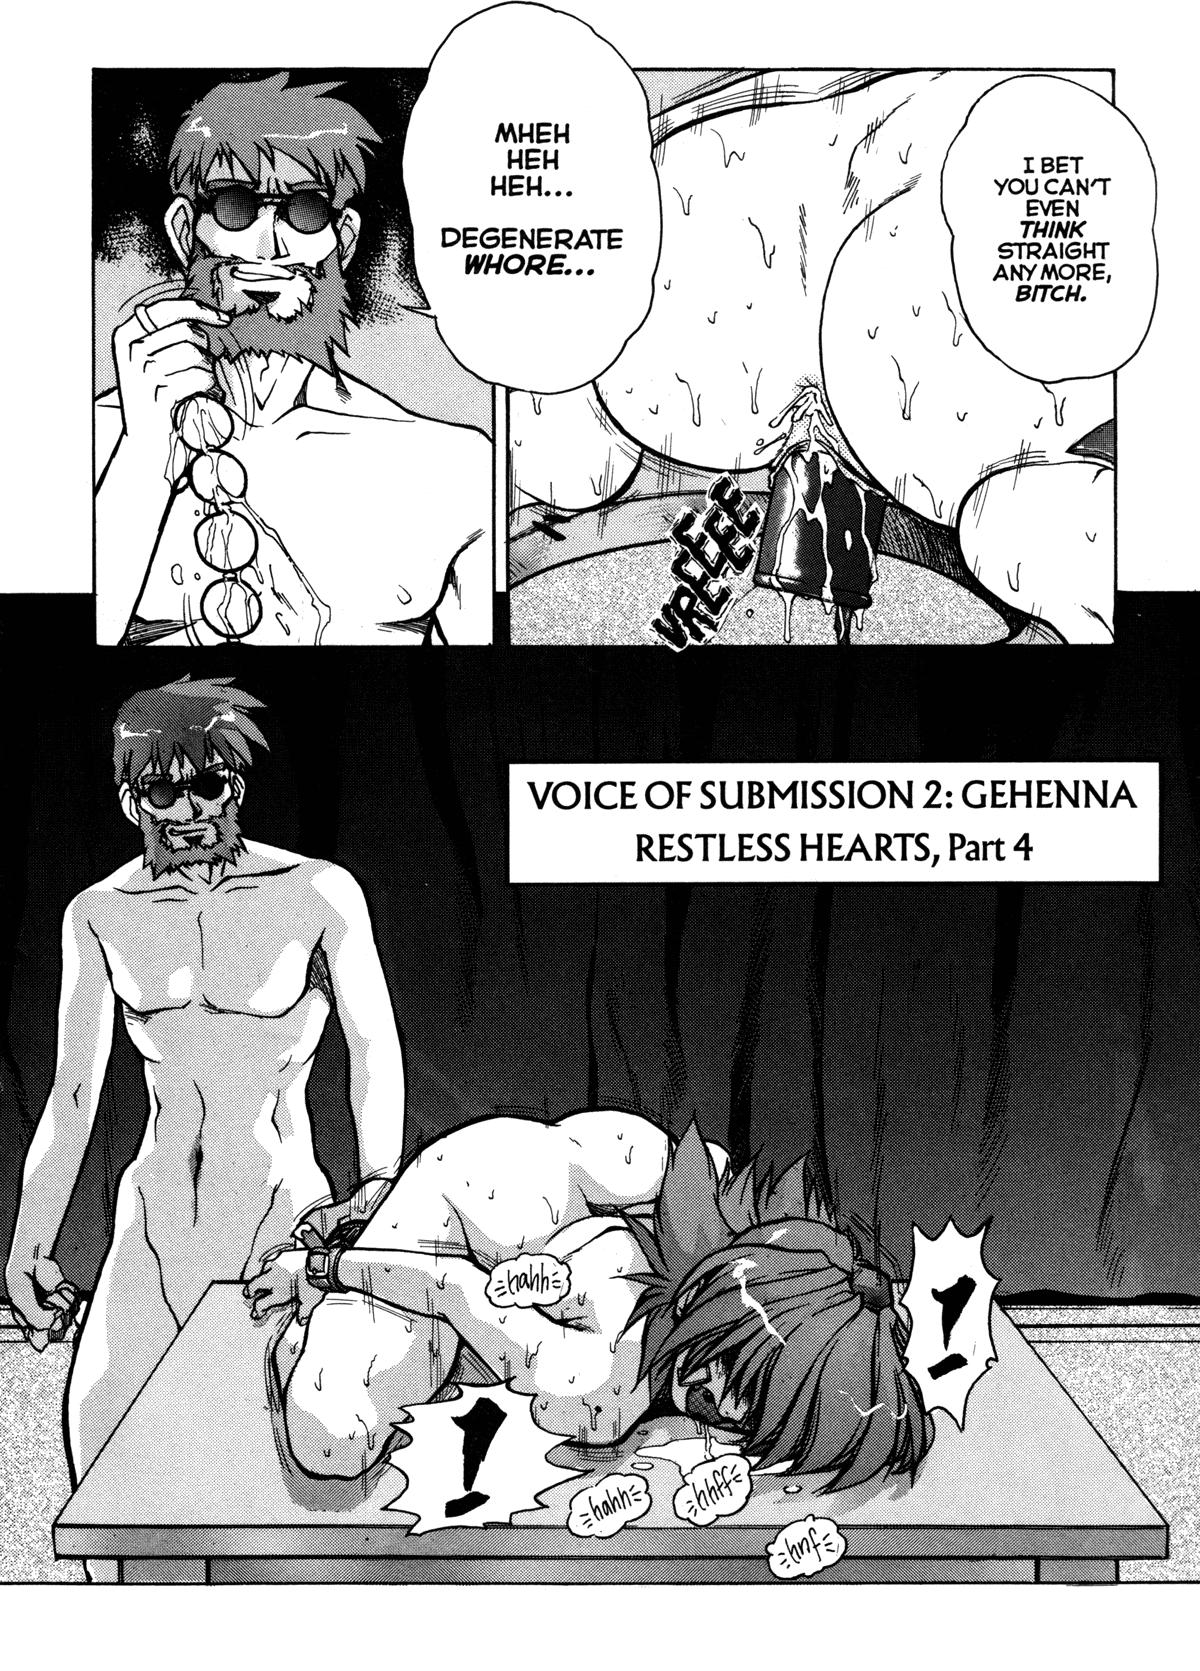 Voice of Submission II - Gehenna 04 6